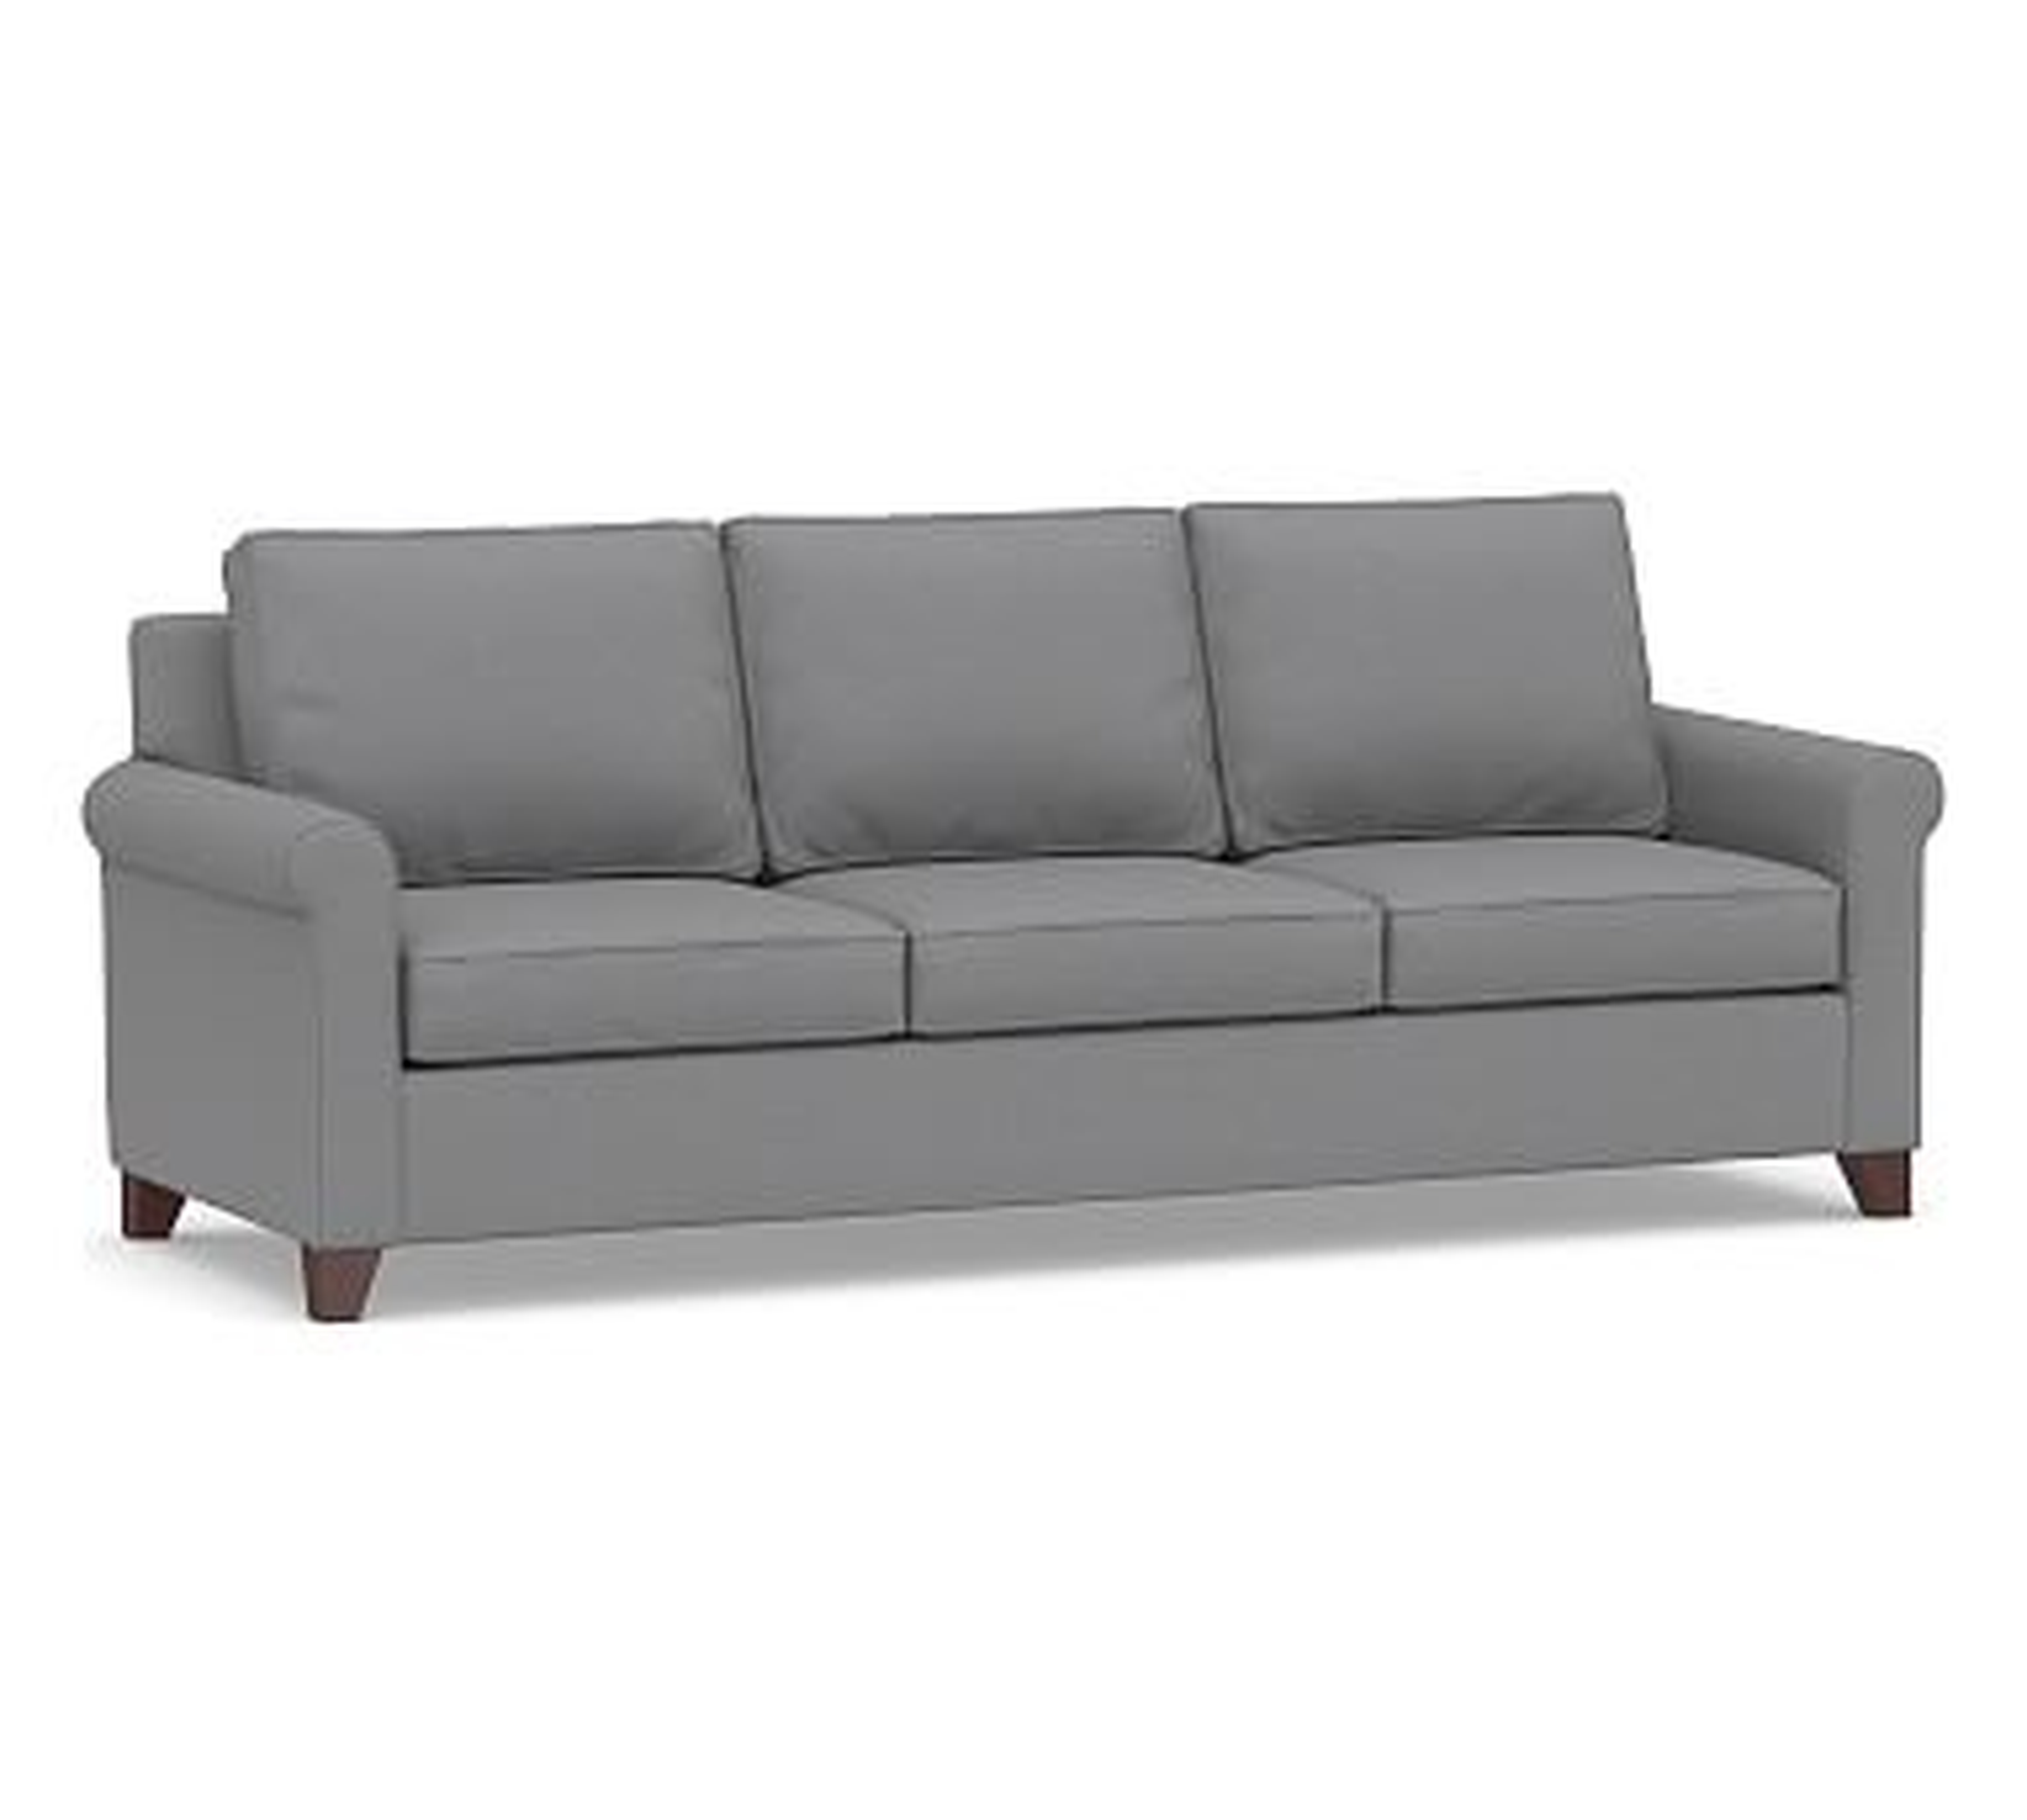 Cameron Roll Arm Upholstered Sofa 88", Polyester Wrapped Cushions, Textured Twill Light Gray - Pottery Barn